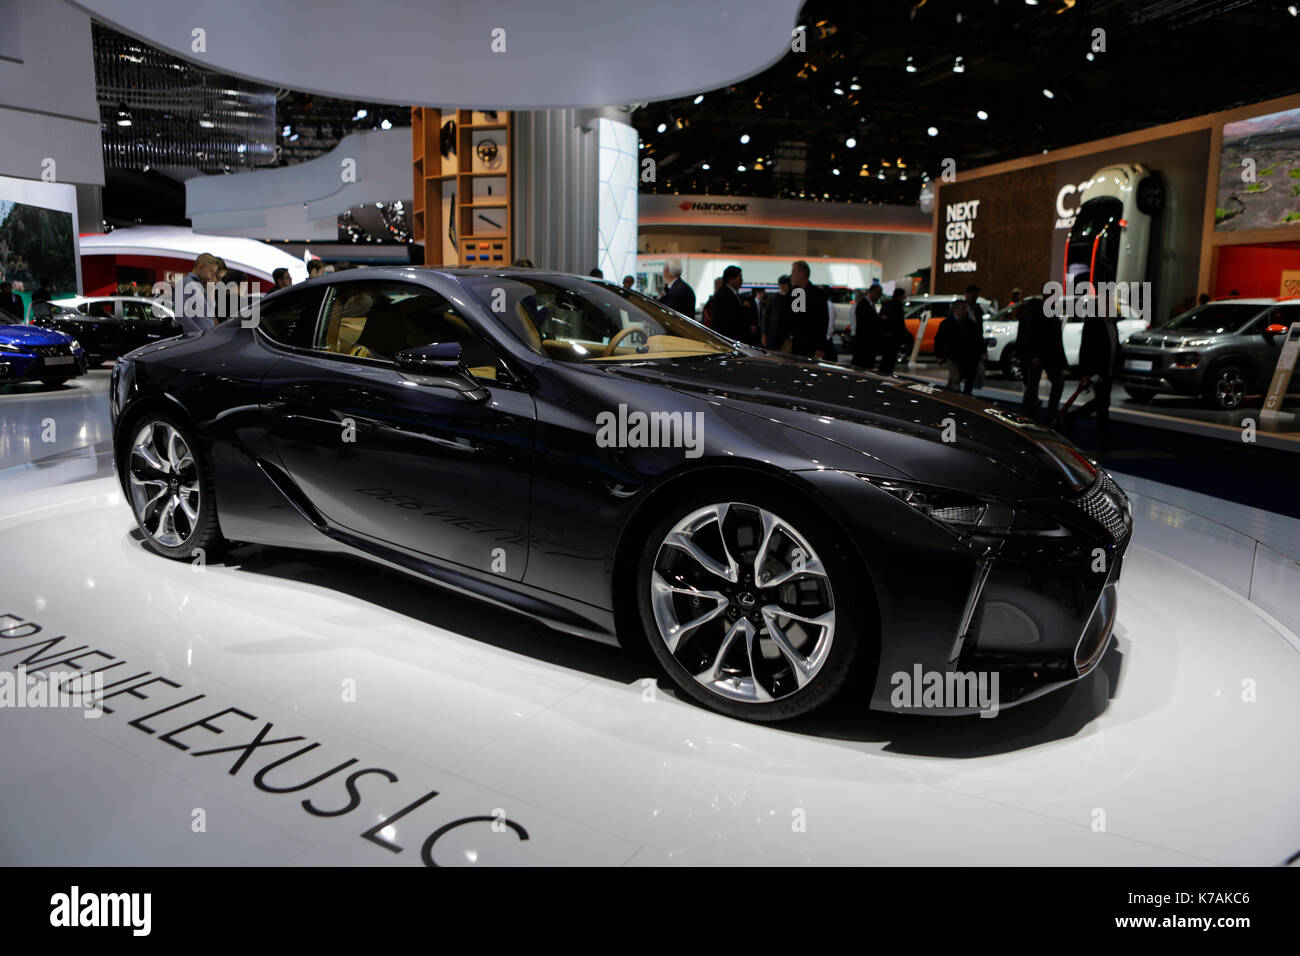 Frankfurt, Germany. 14th September 2017. The Japanese car manufacturer Lexus presents the Lexus LC 500 at the 67. IAA. The 67. Internationale Automobil-Ausstellung (IAA) opened in Frankfurt for trade visitors. It is with over 1000 exhibitors one of the largest Motor Shows in the world. The show will open for the general public on the 16th September. Stock Photo